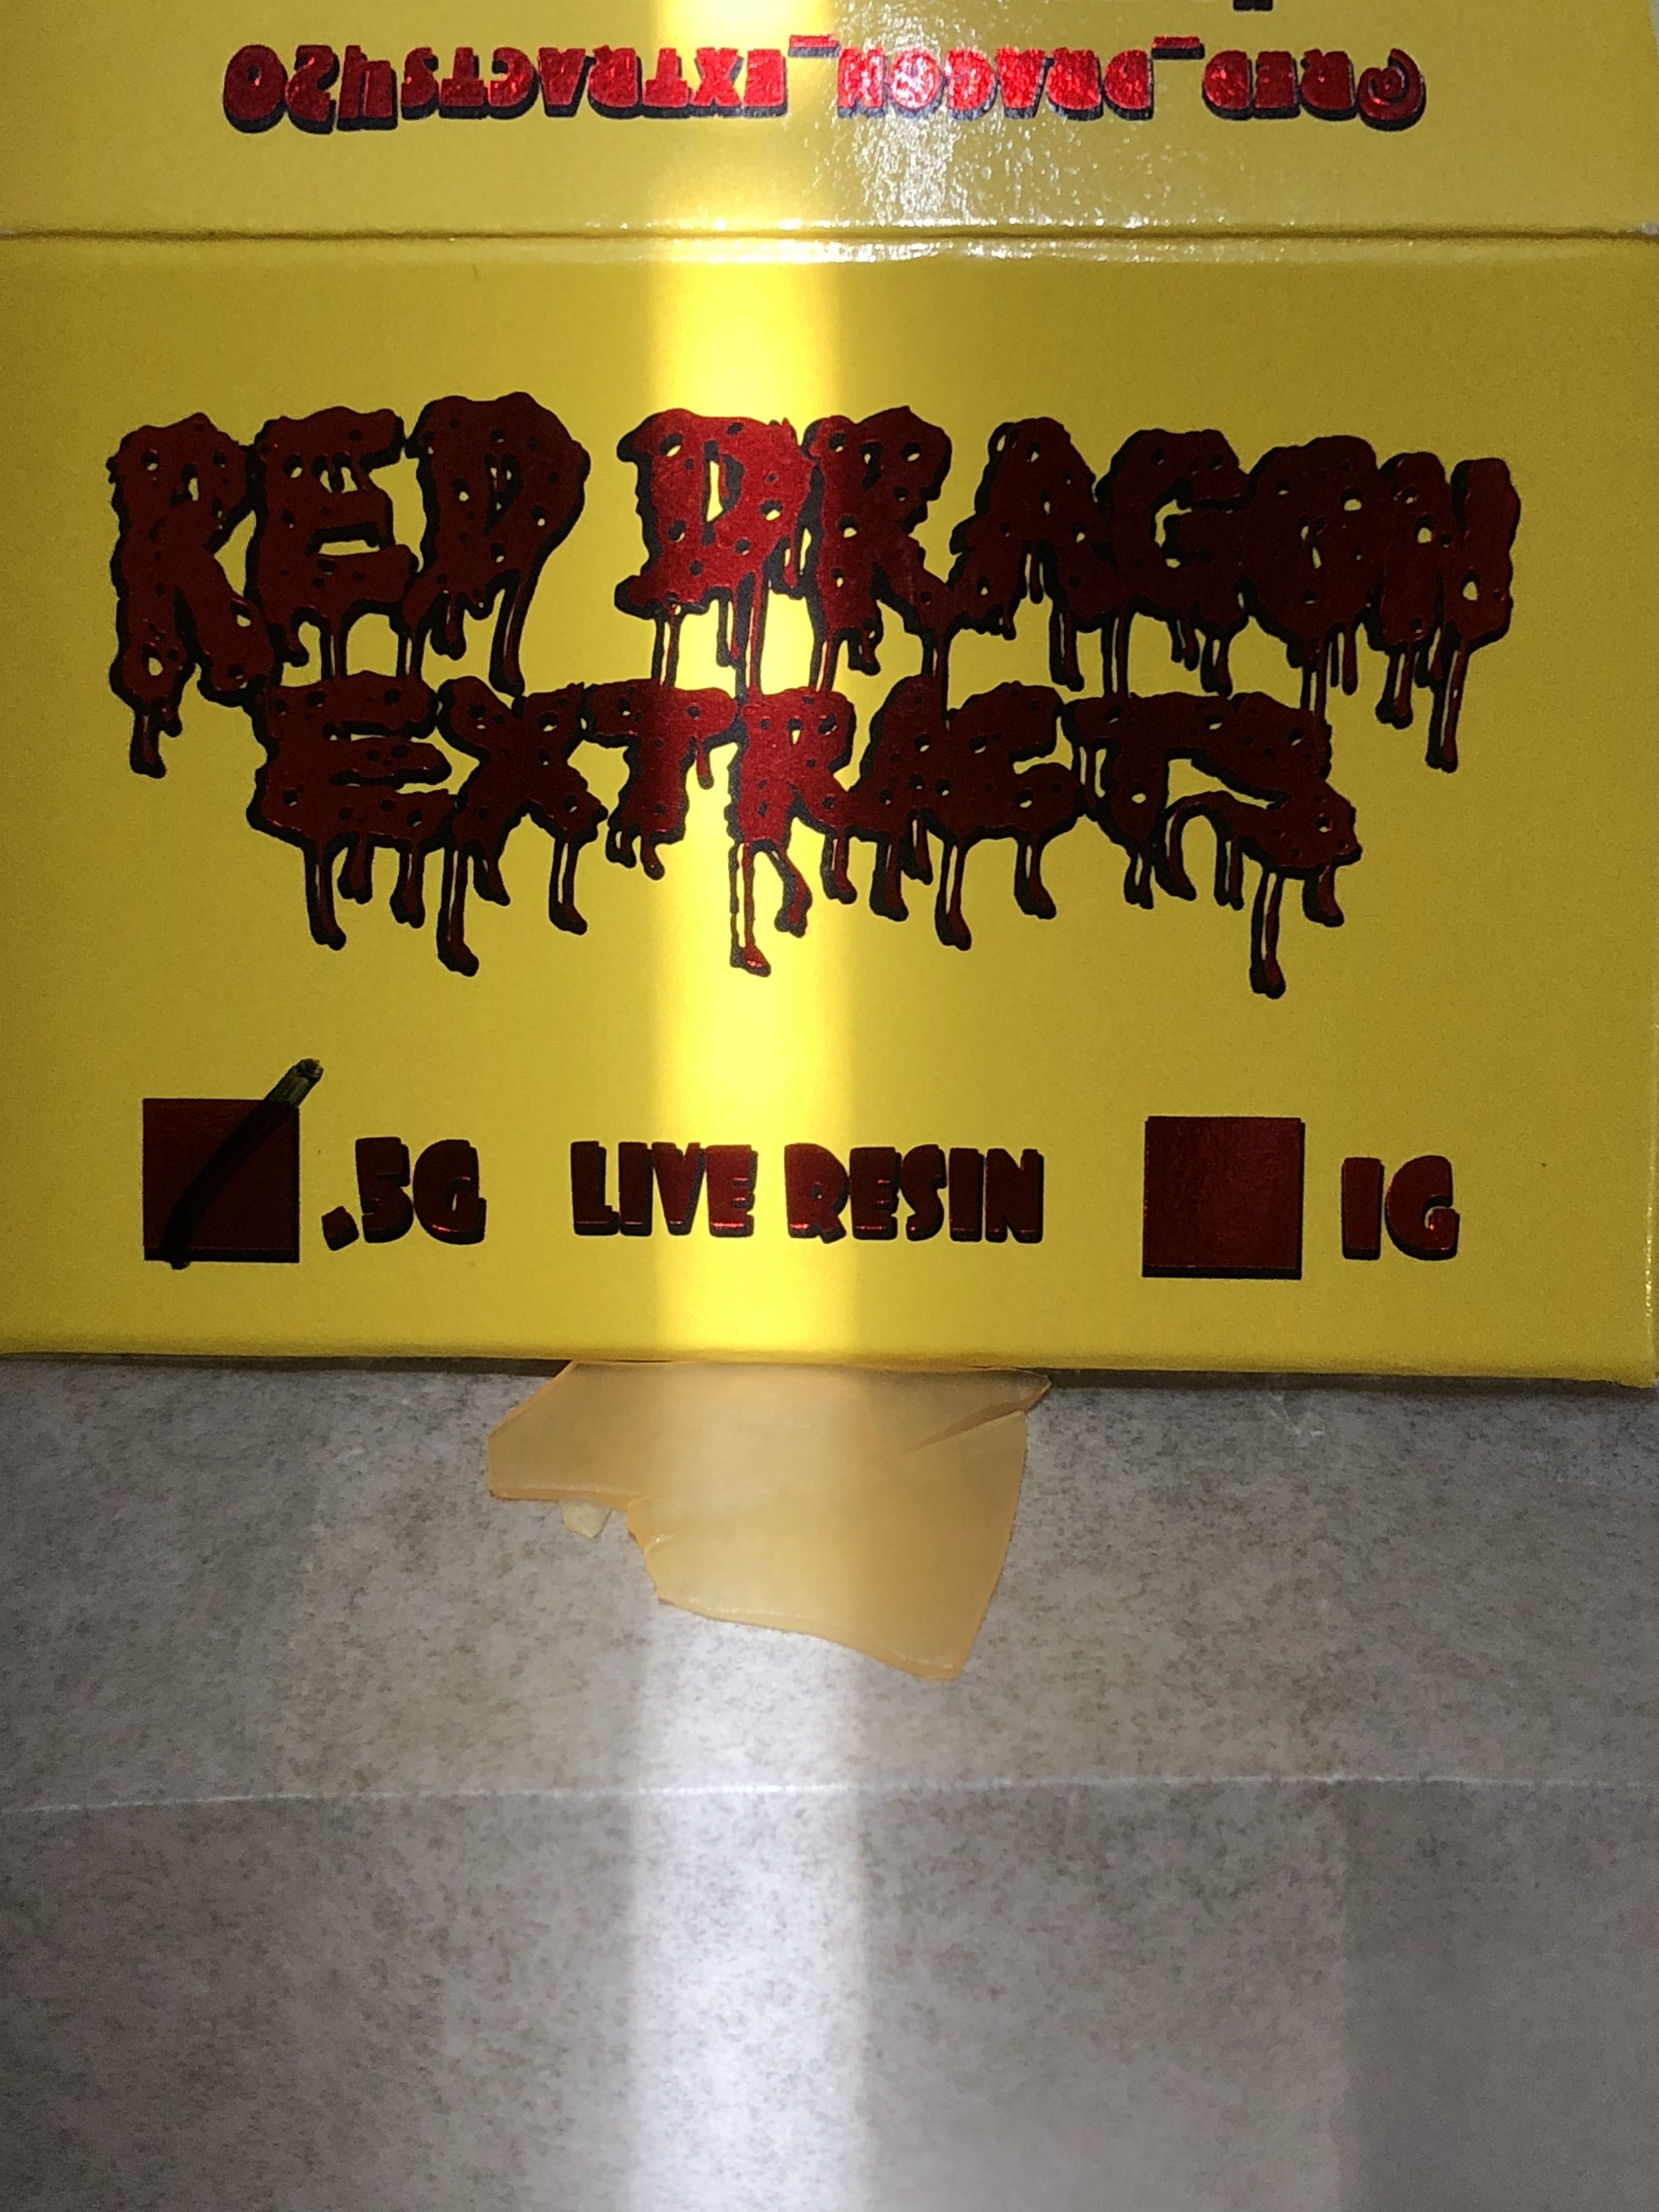 concentrate-red-dragon-extracts-live-resin-shatter-5g